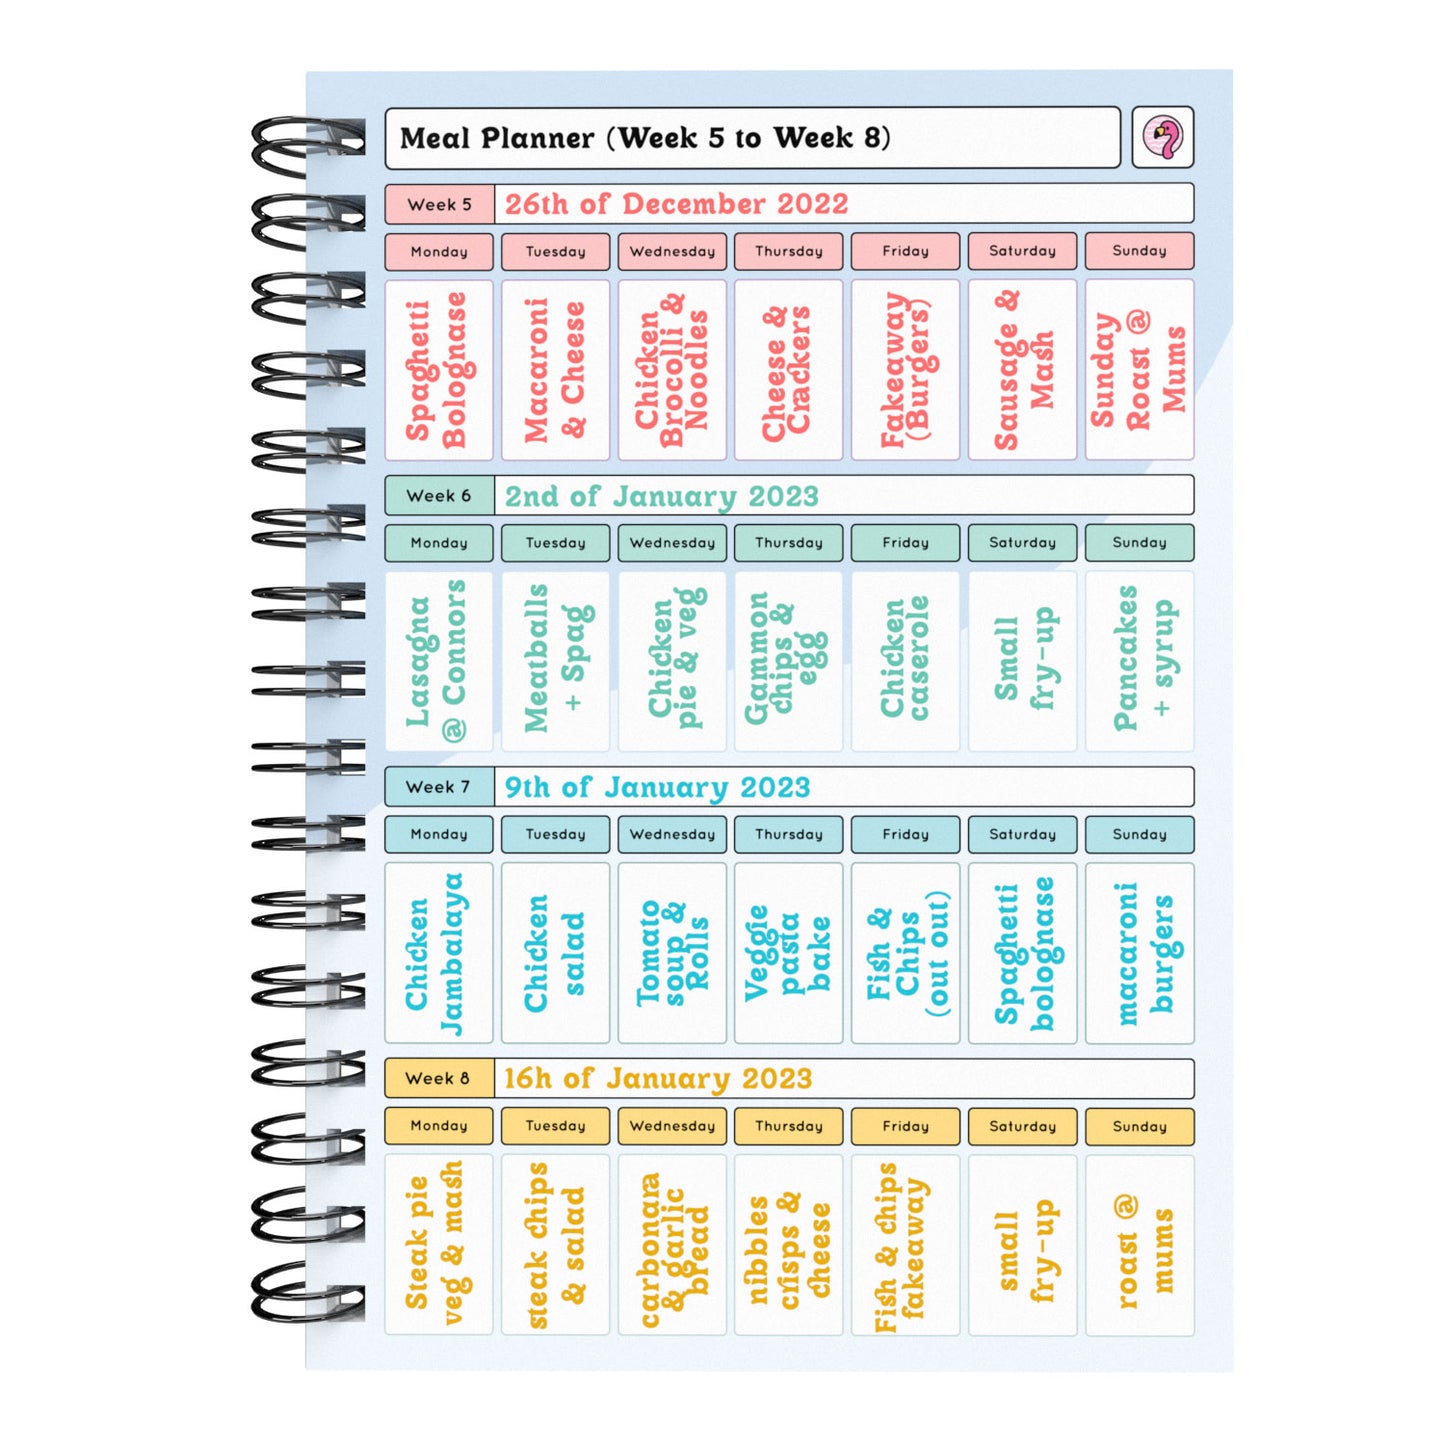 Food Diary - C4 - Calorie Counting